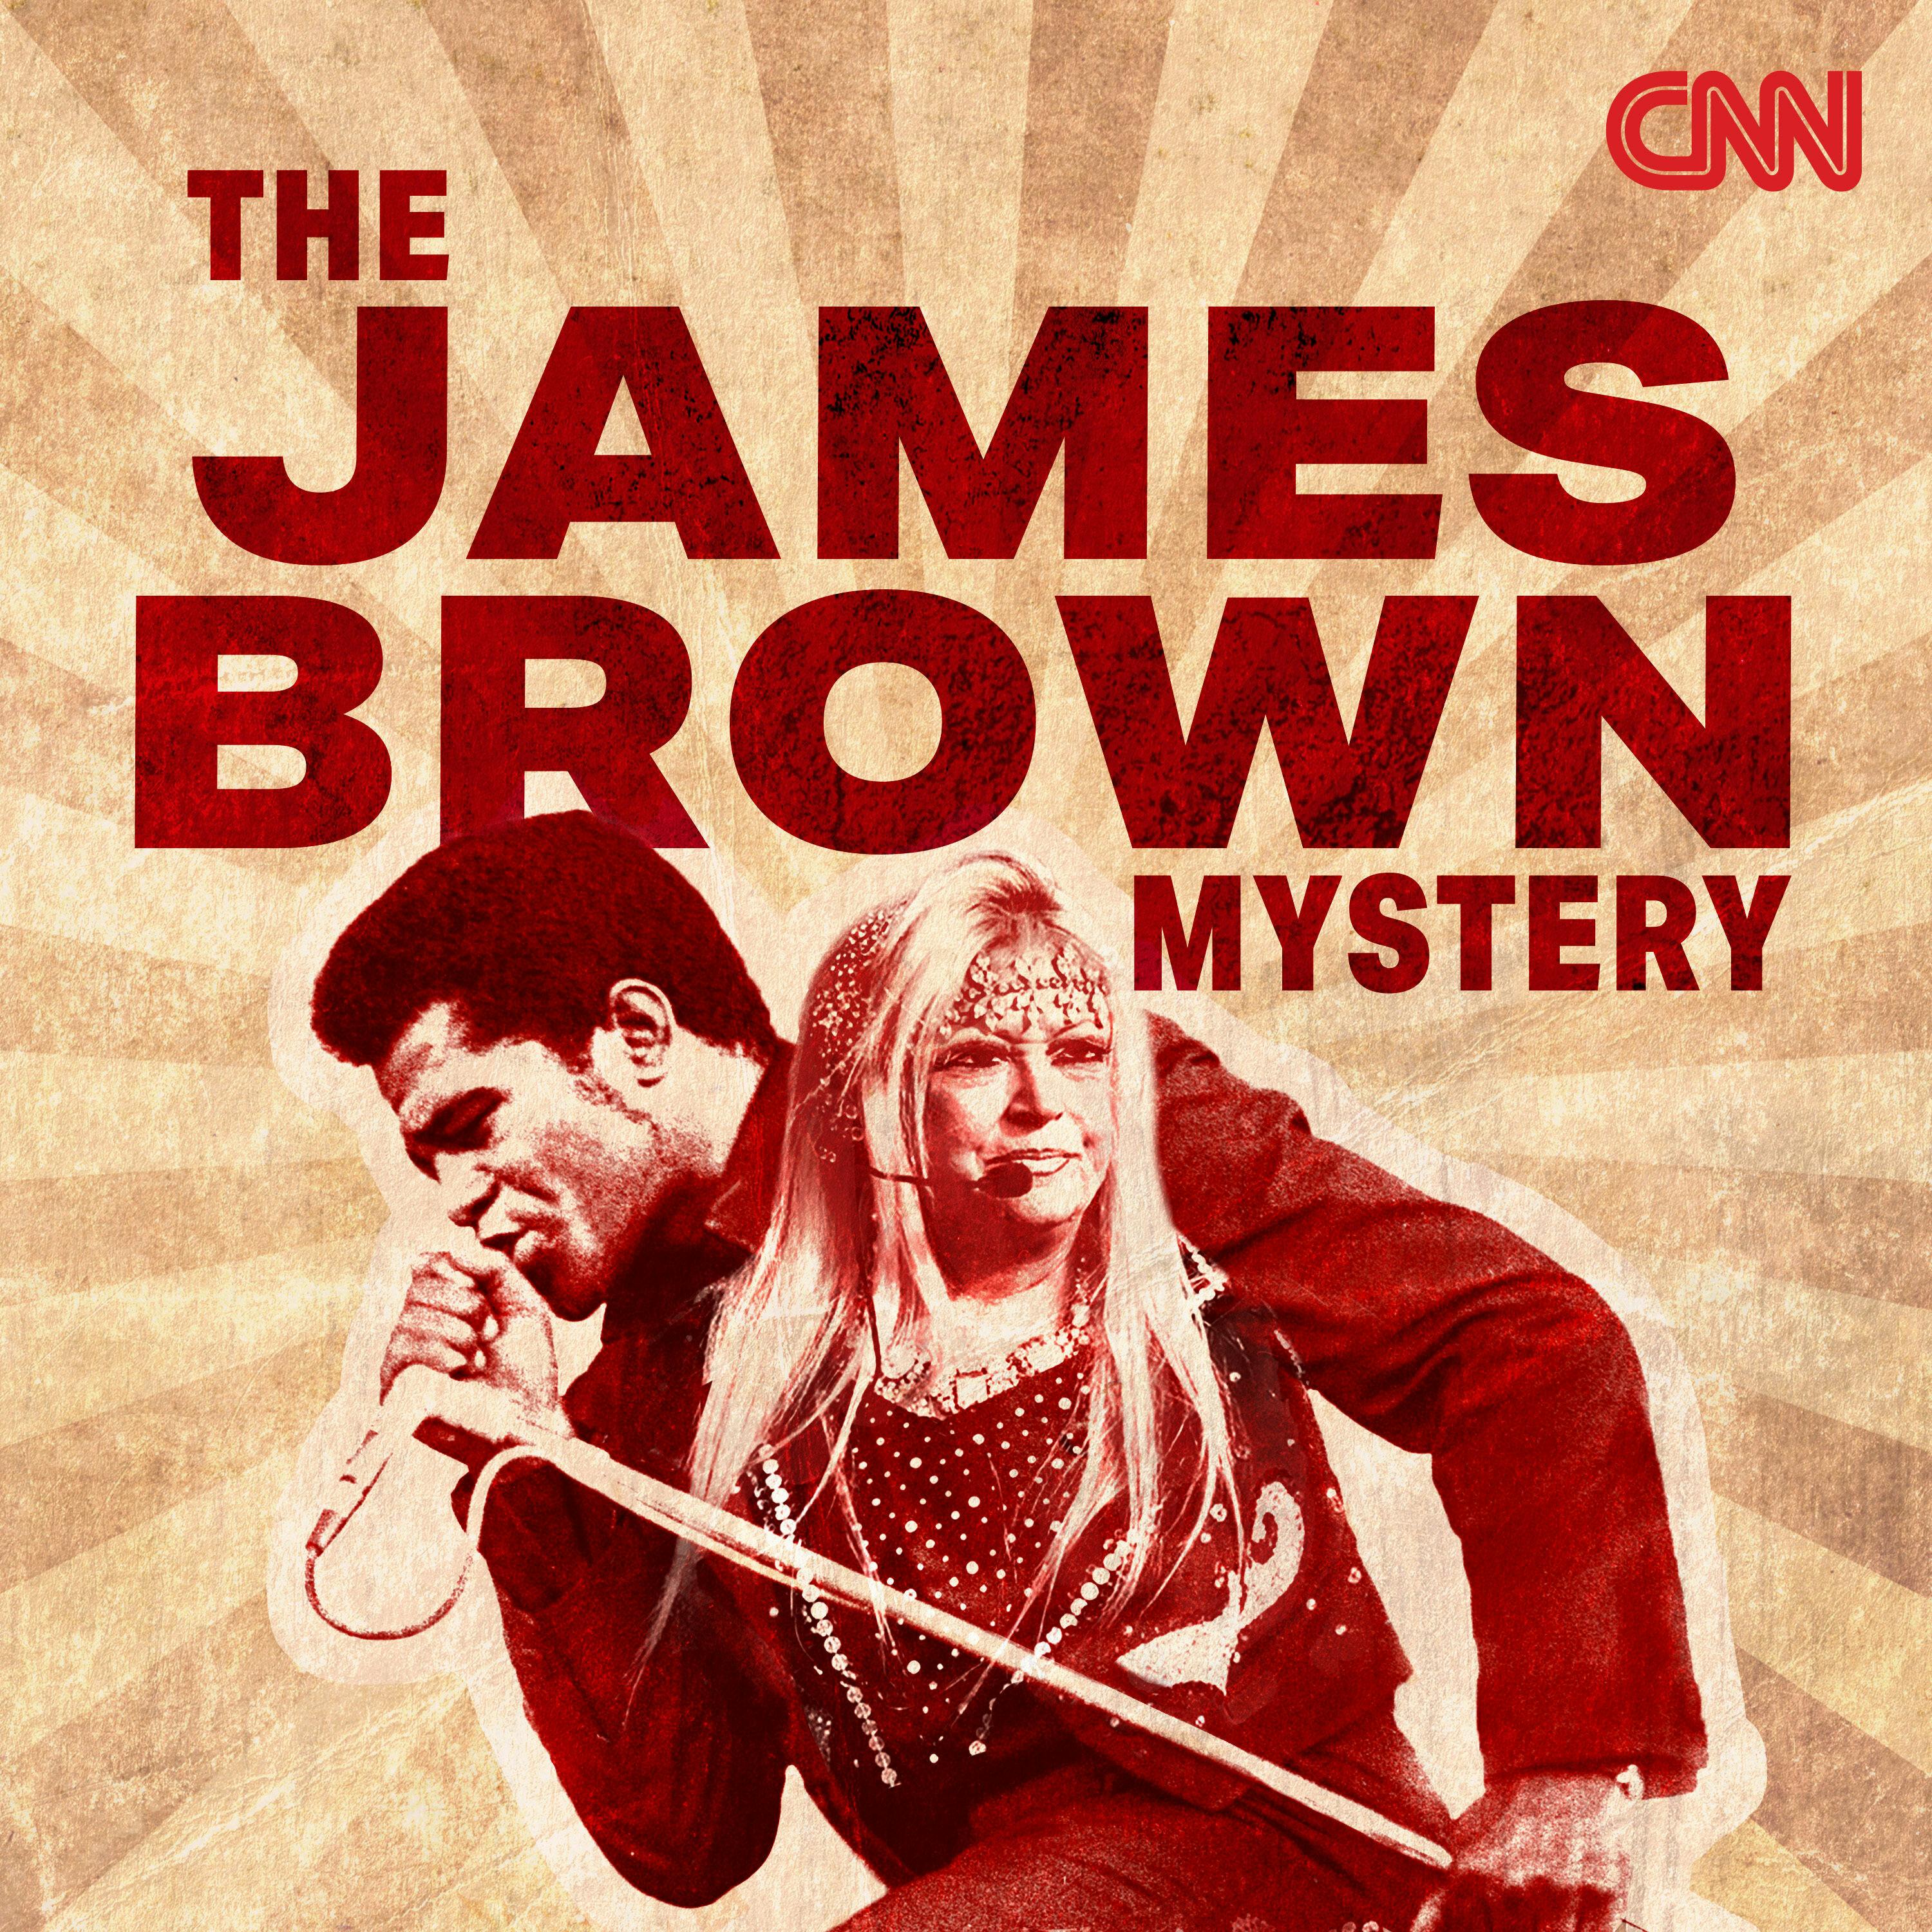 Introducing: The James Brown Mystery